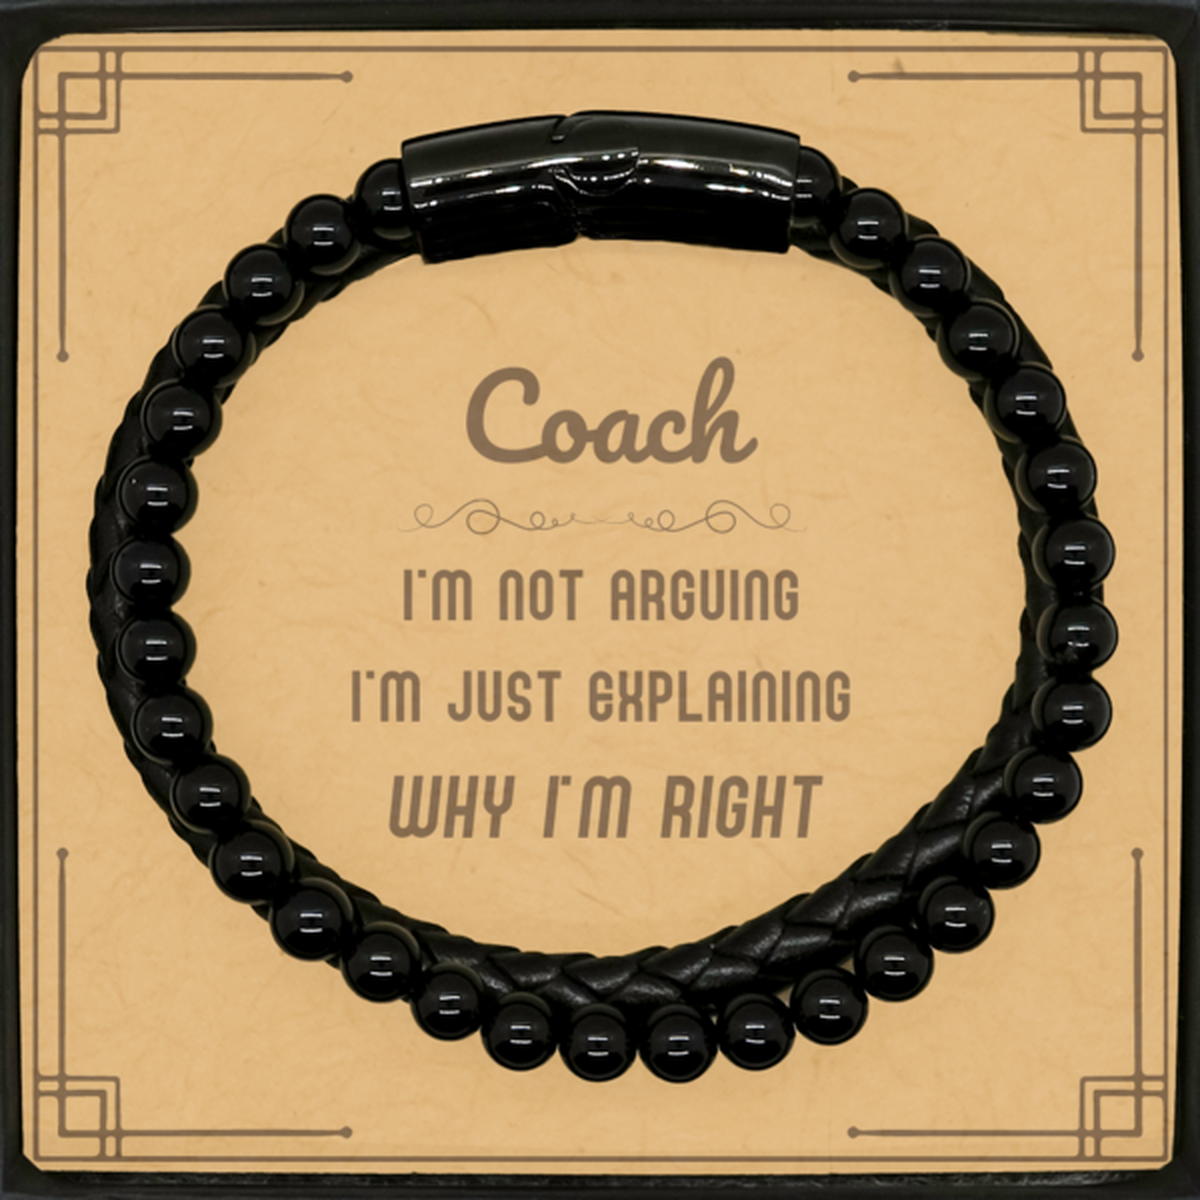 Coach I'm not Arguing. I'm Just Explaining Why I'm RIGHT Stone Leather Bracelets, Funny Saying Quote Coach Gifts For Coach Message Card Graduation Birthday Christmas Gifts for Men Women Coworker